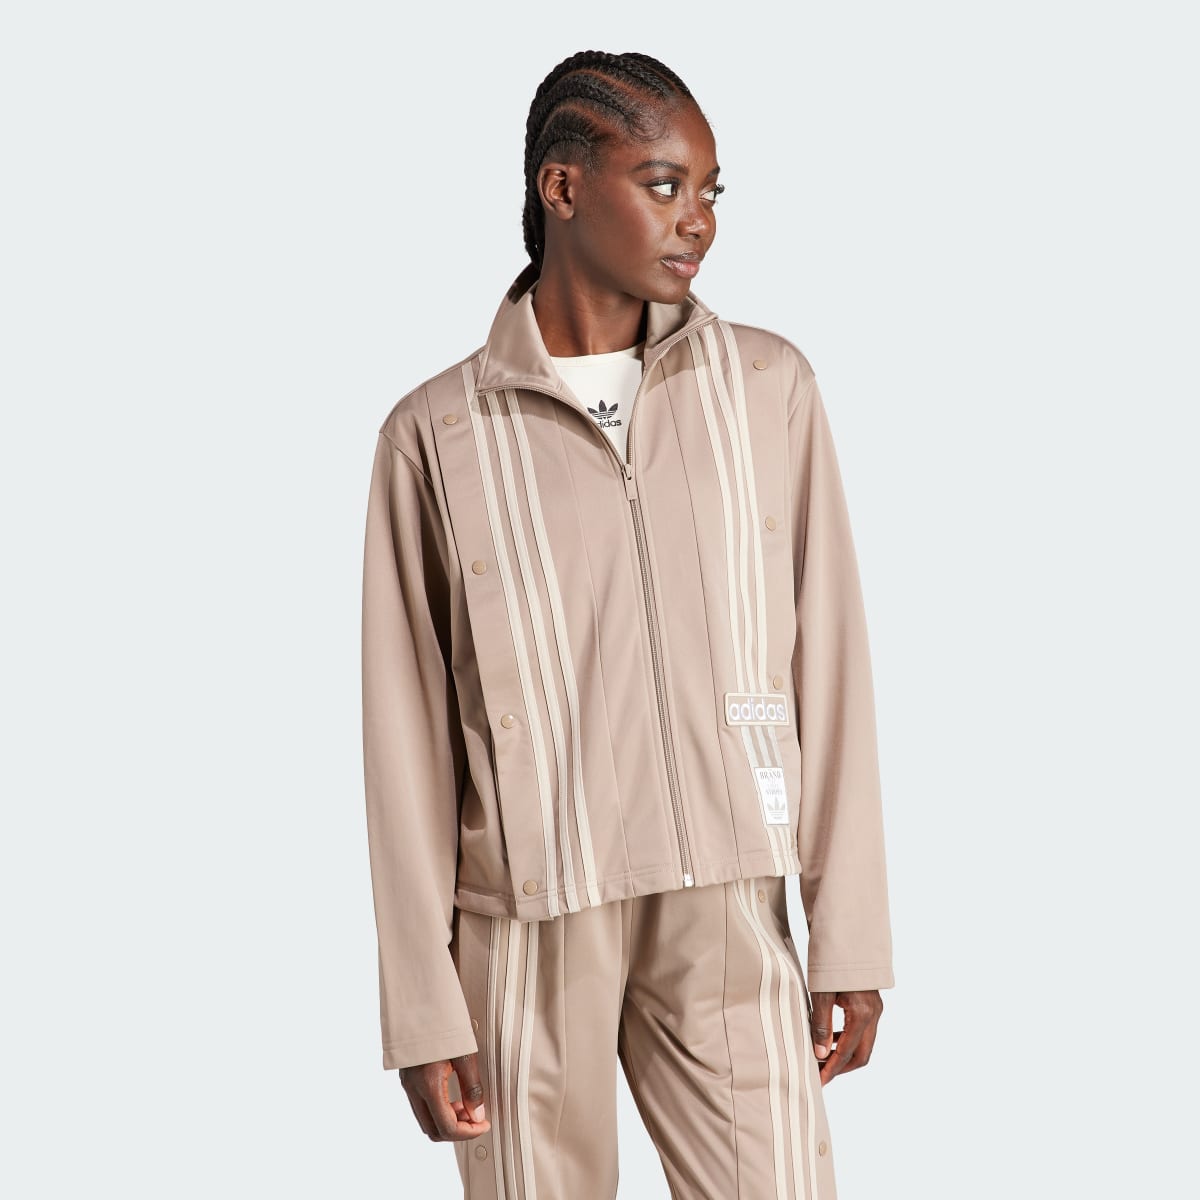 Adidas Neutral Court Track Top. 4